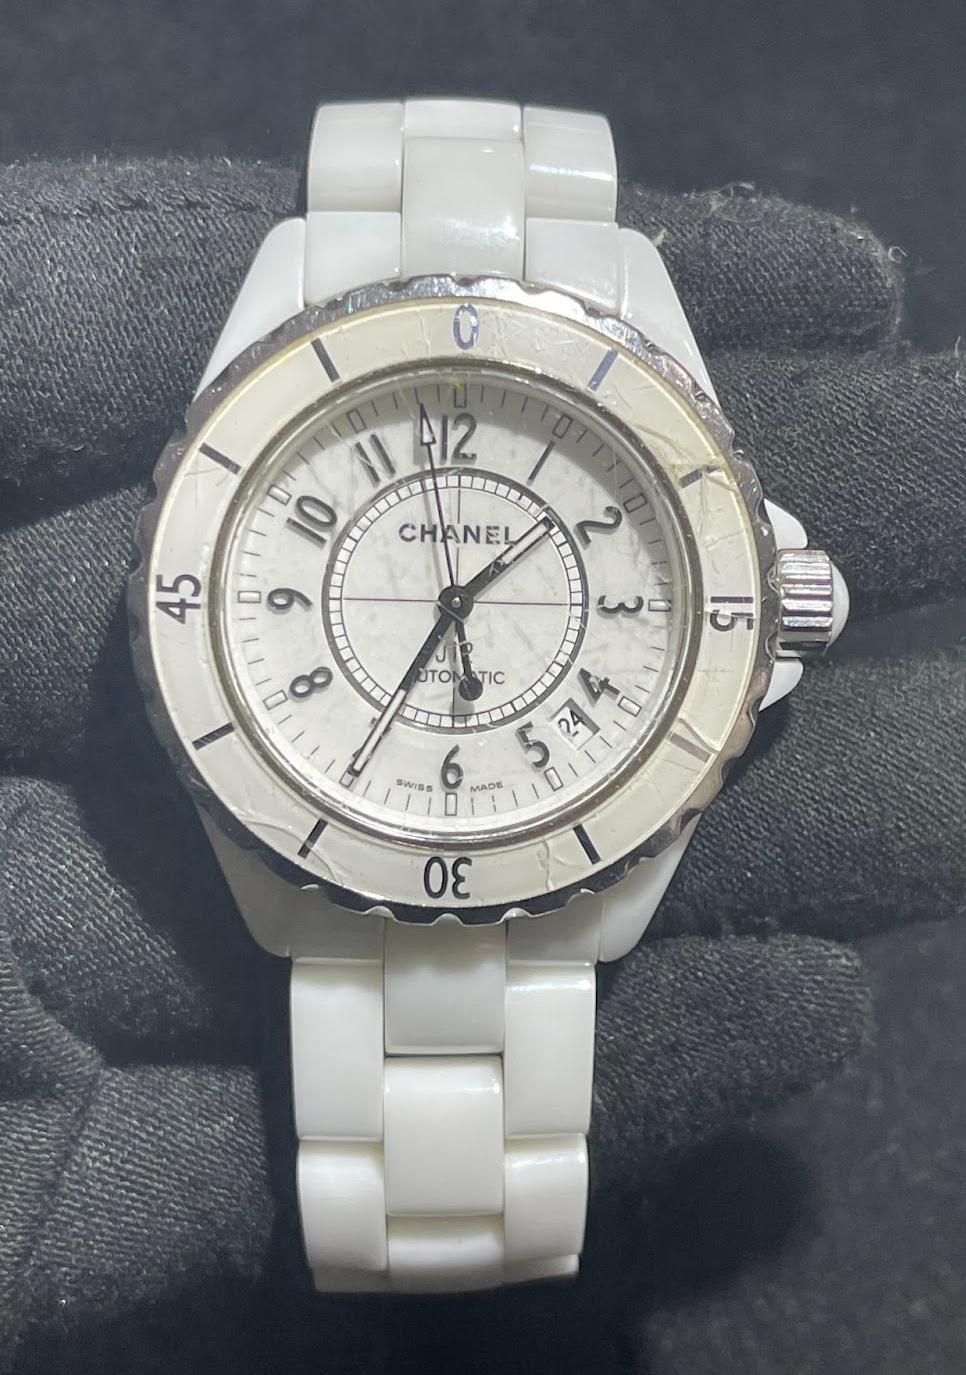 Transforming a Chanel J12 Automatic Watch